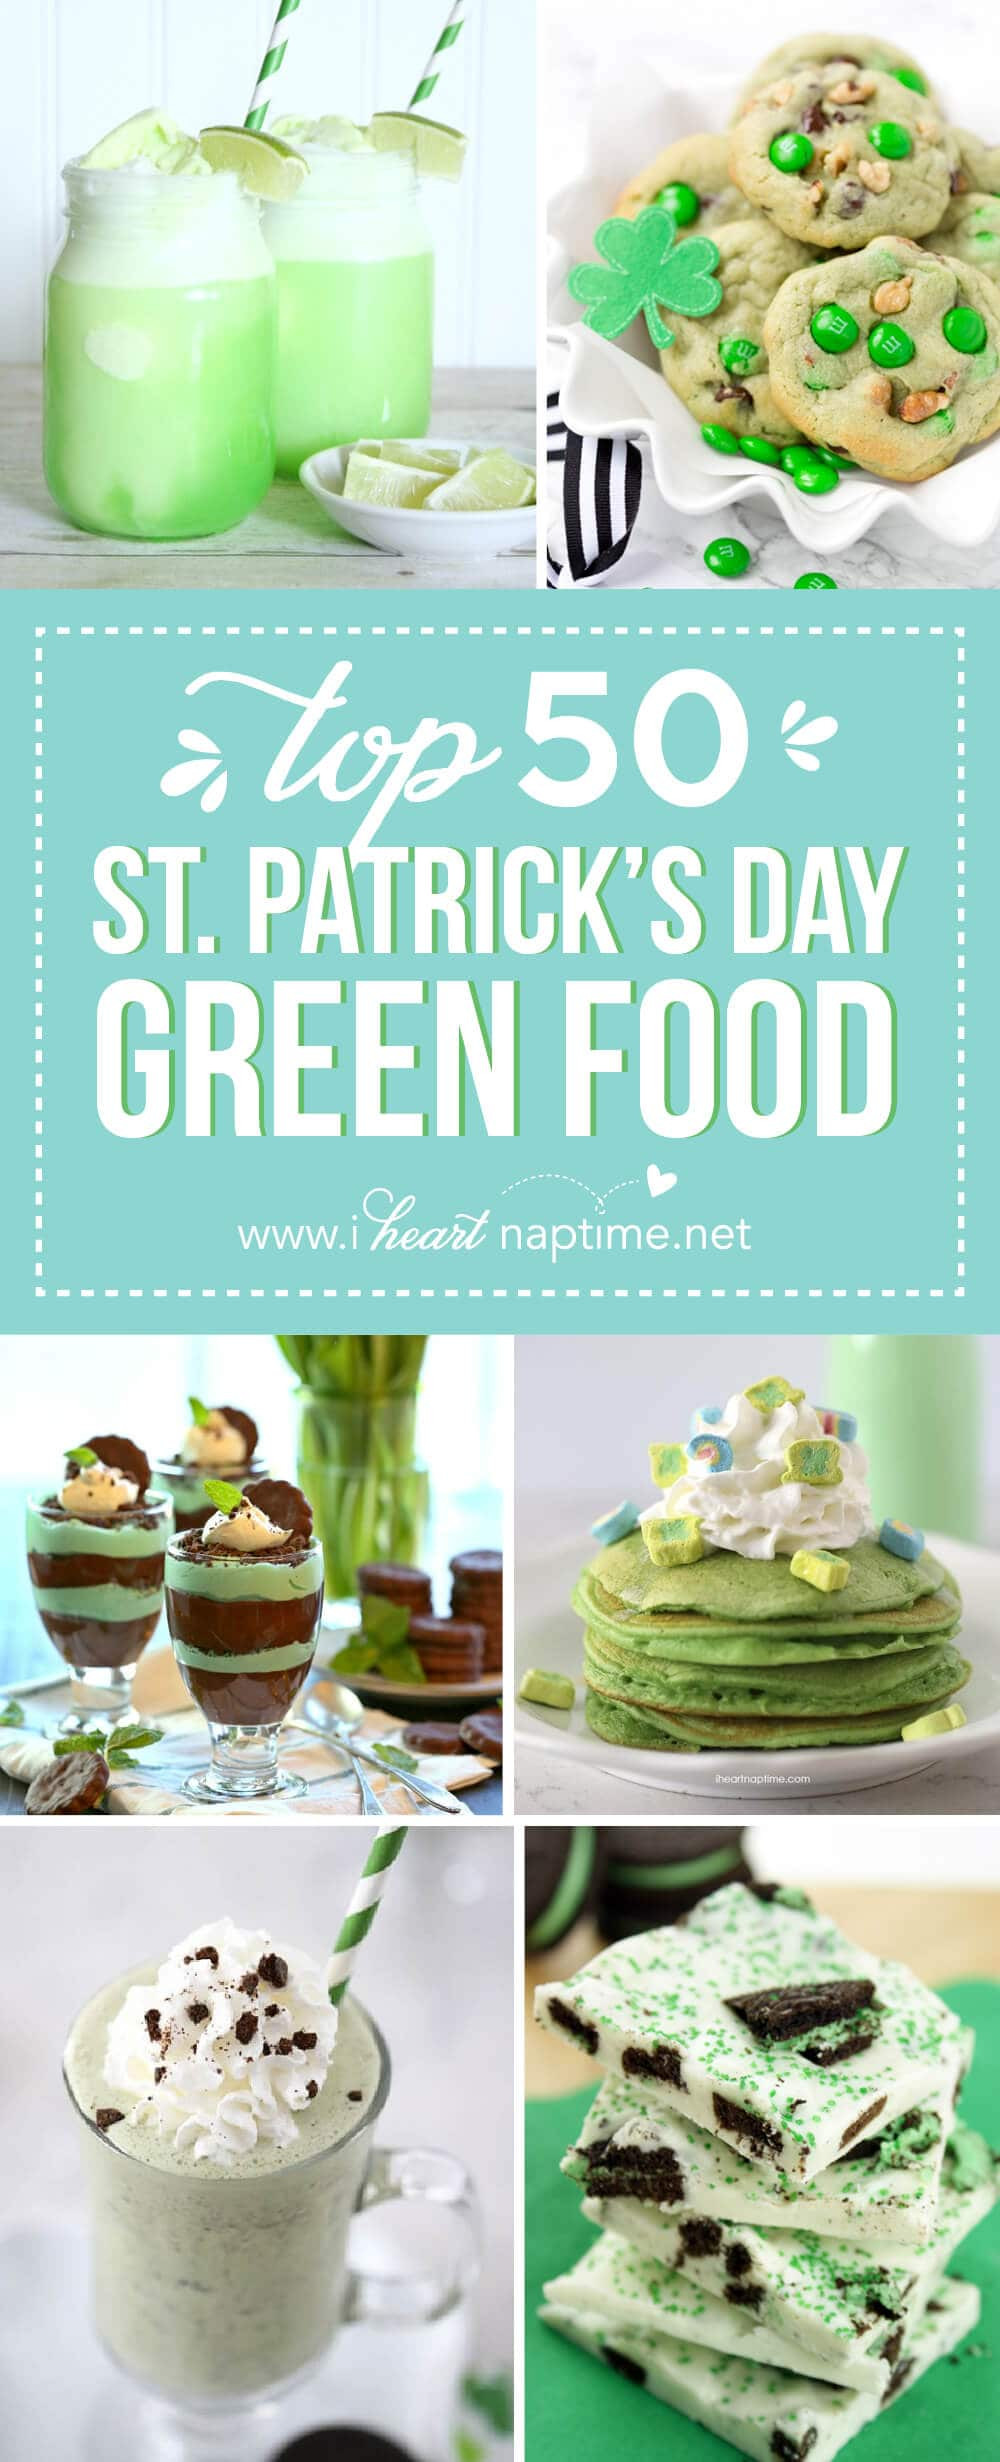 Food For St Patrick's Day Party
 Top 50 St Patrick s Day Green Food I Heart Nap Time